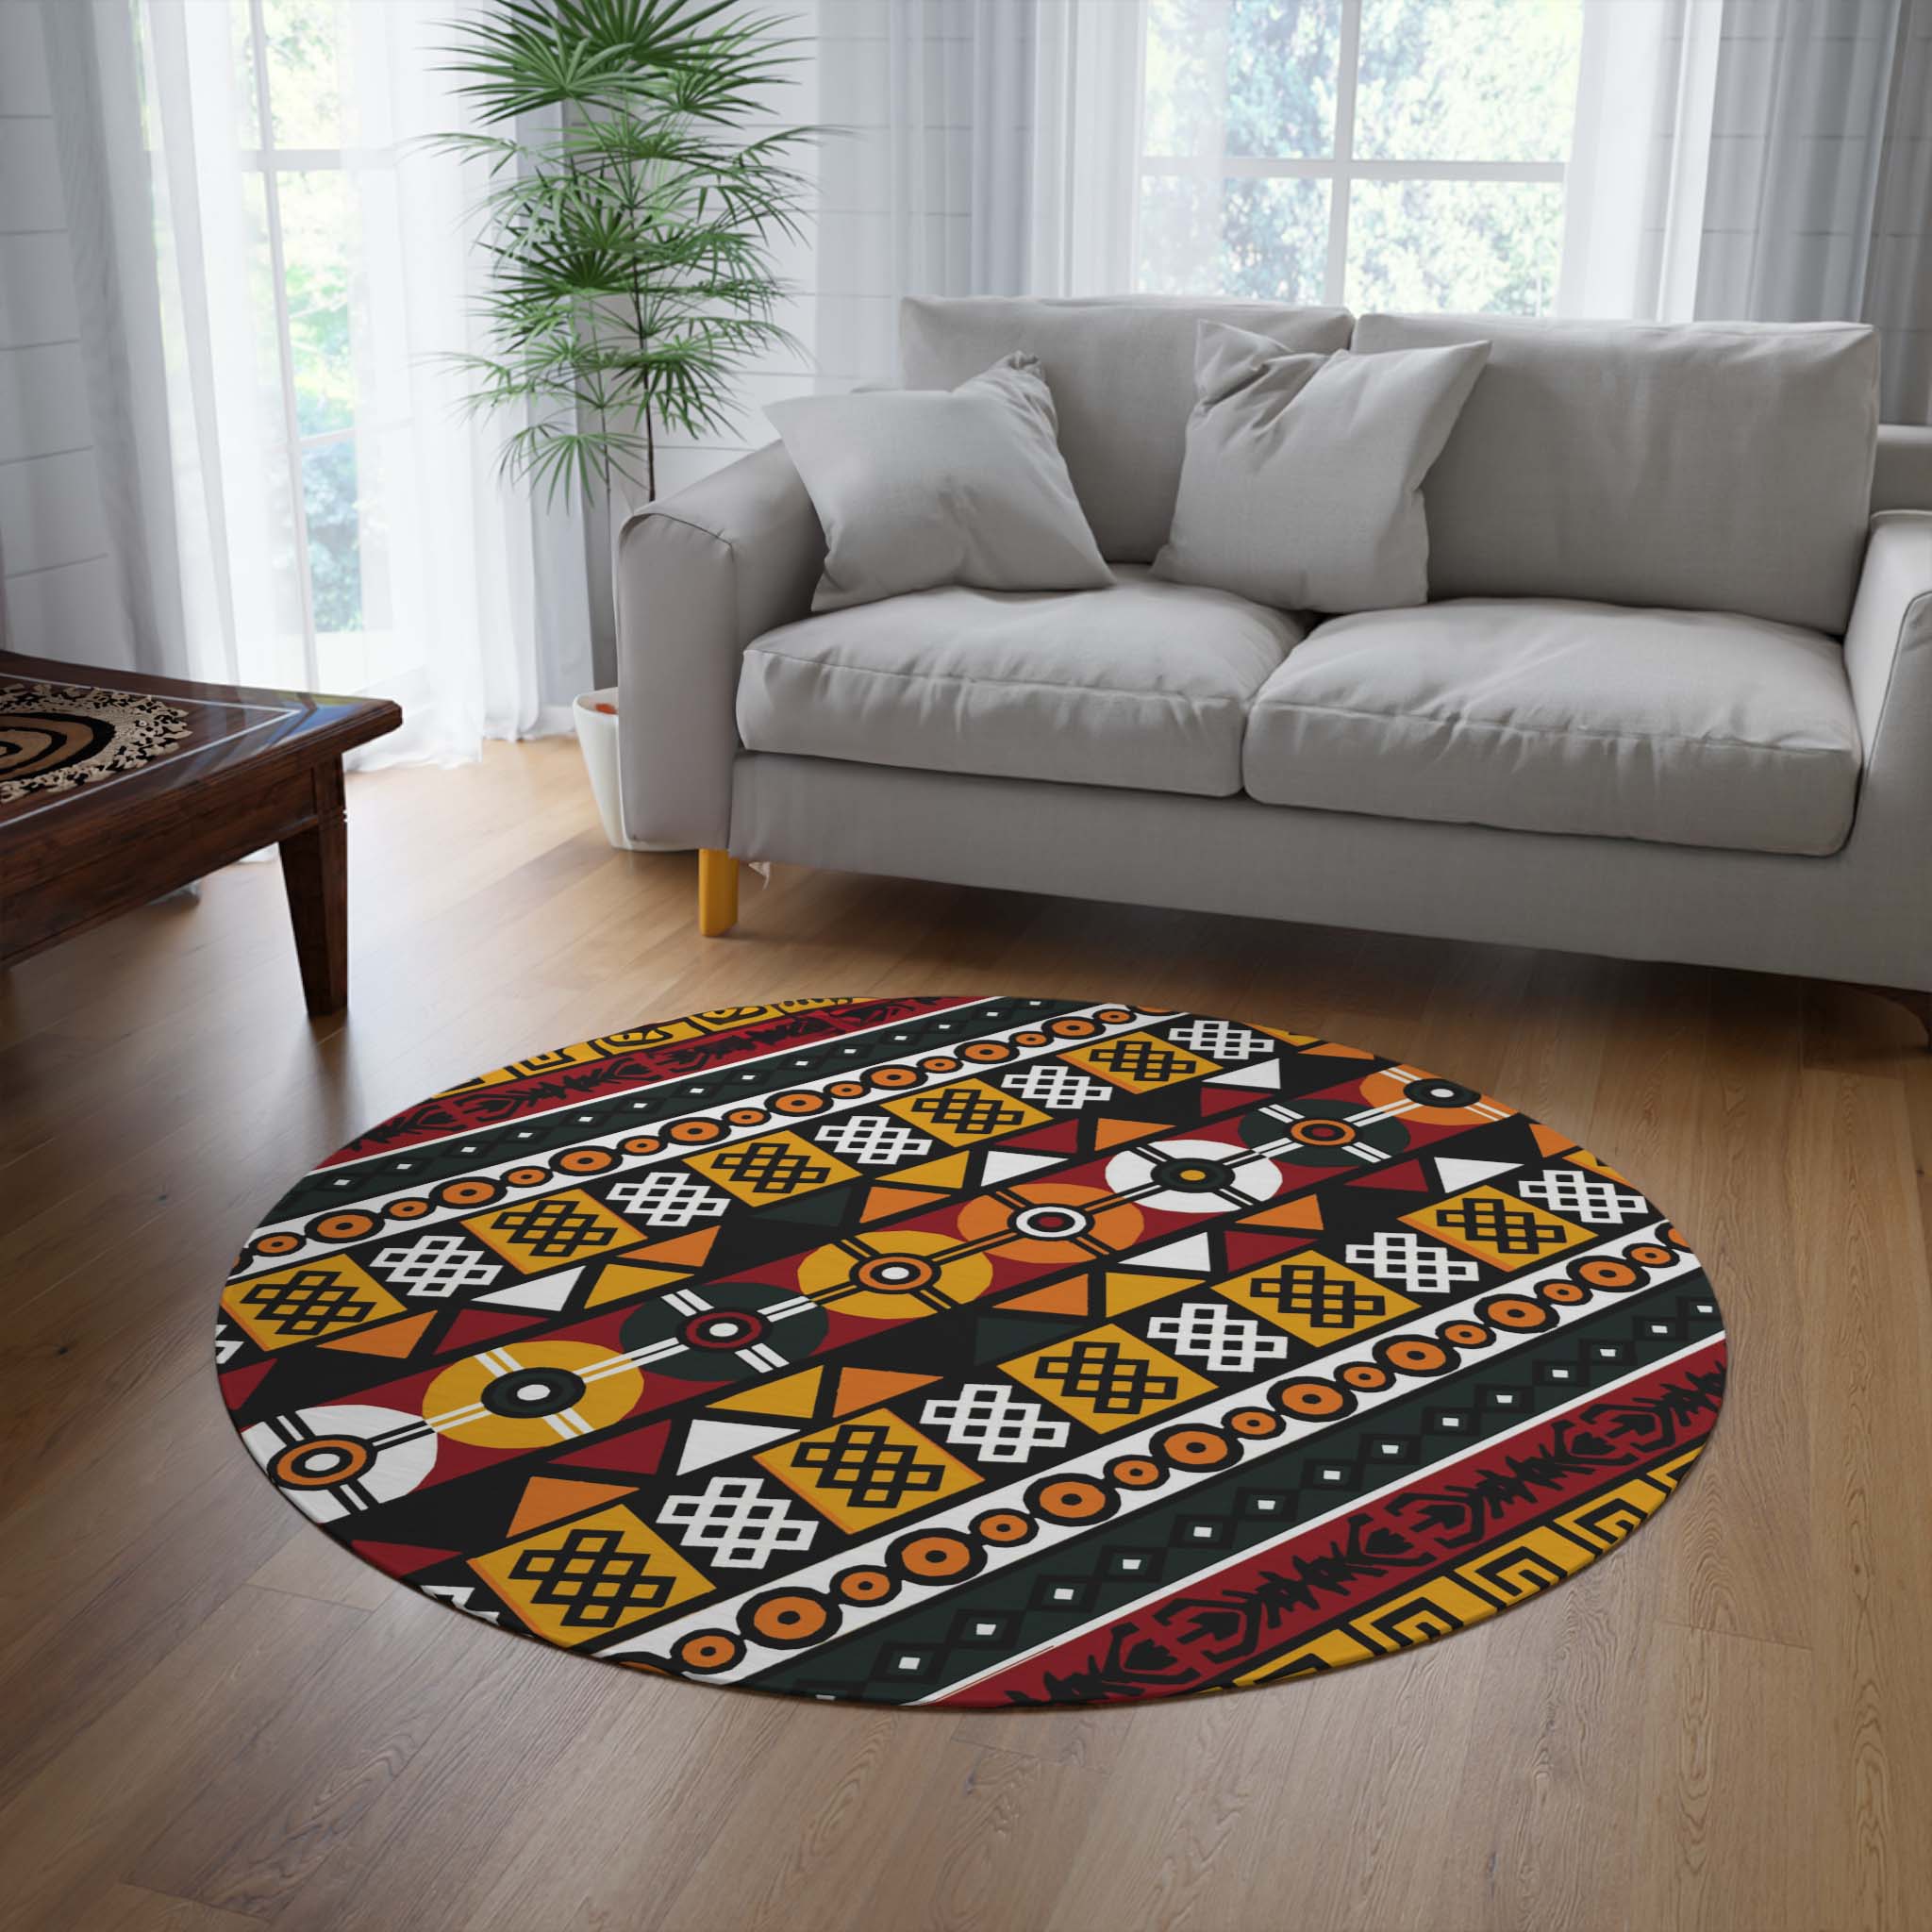 African Print Round Area Rugs Mudcloth Carpet - Bynelo